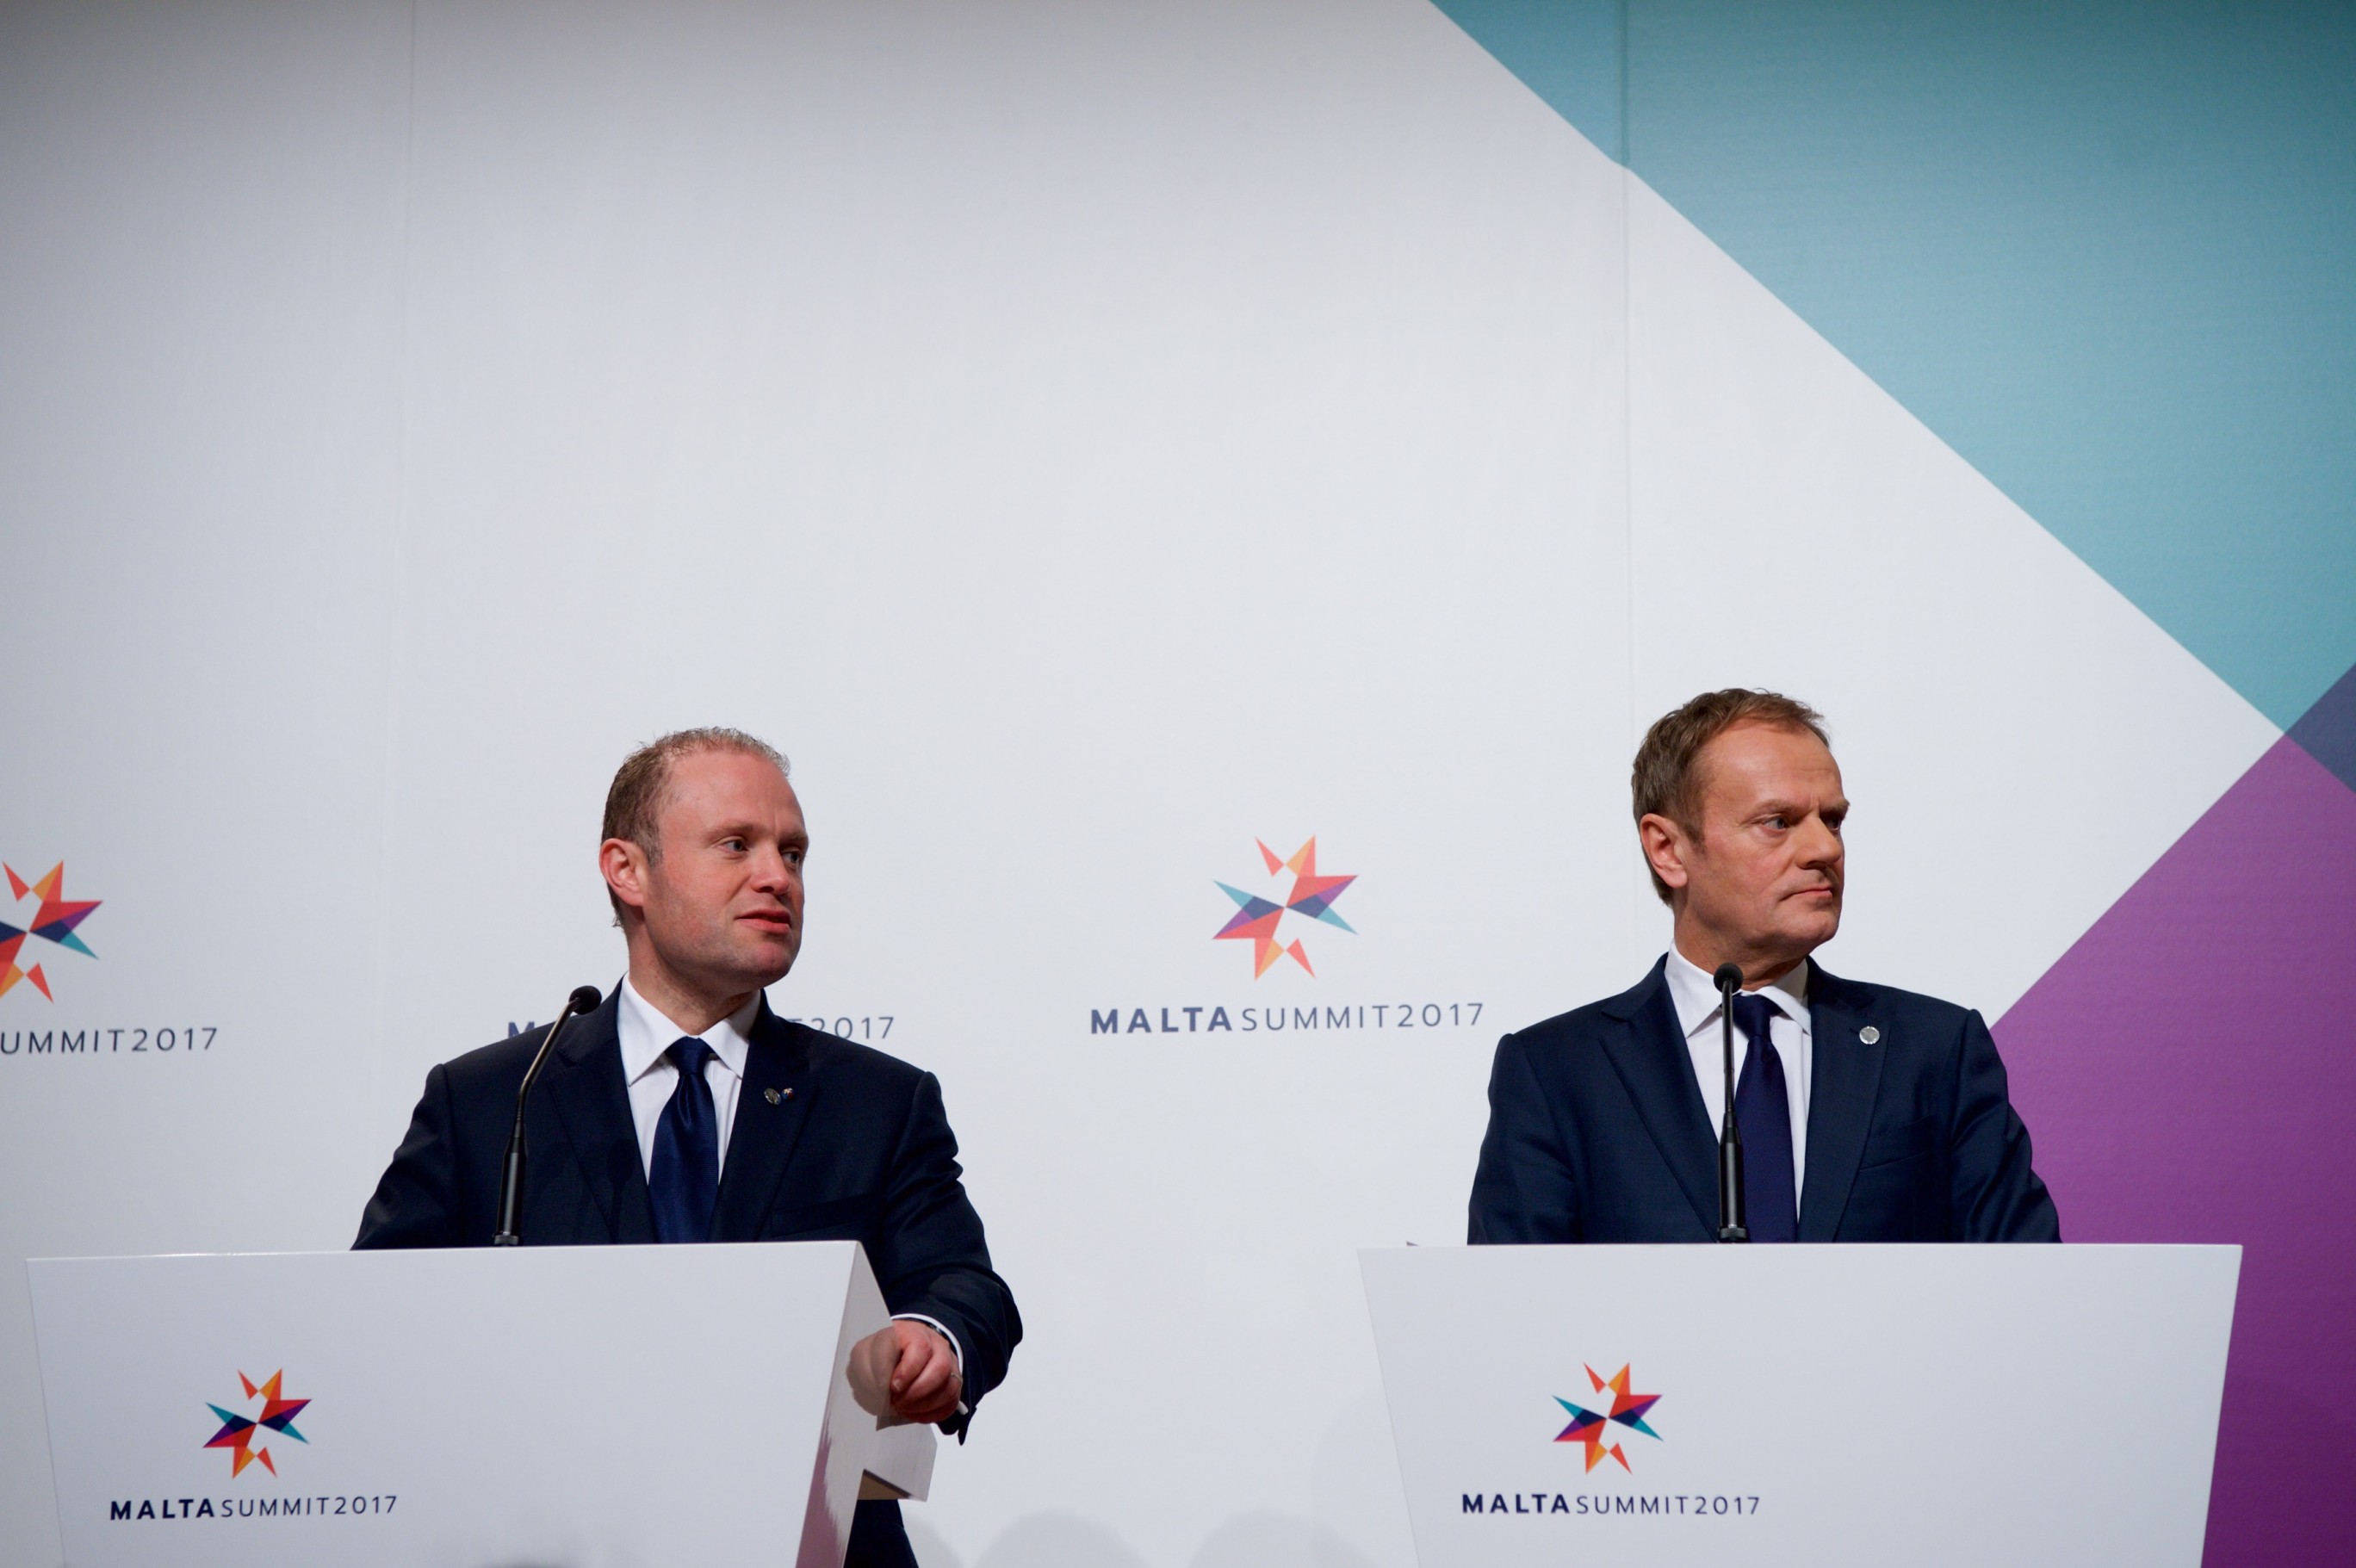 Prime Minister of Malta, Joseph Muscat at the press conference after an informal summit of EU leaders in Valletta